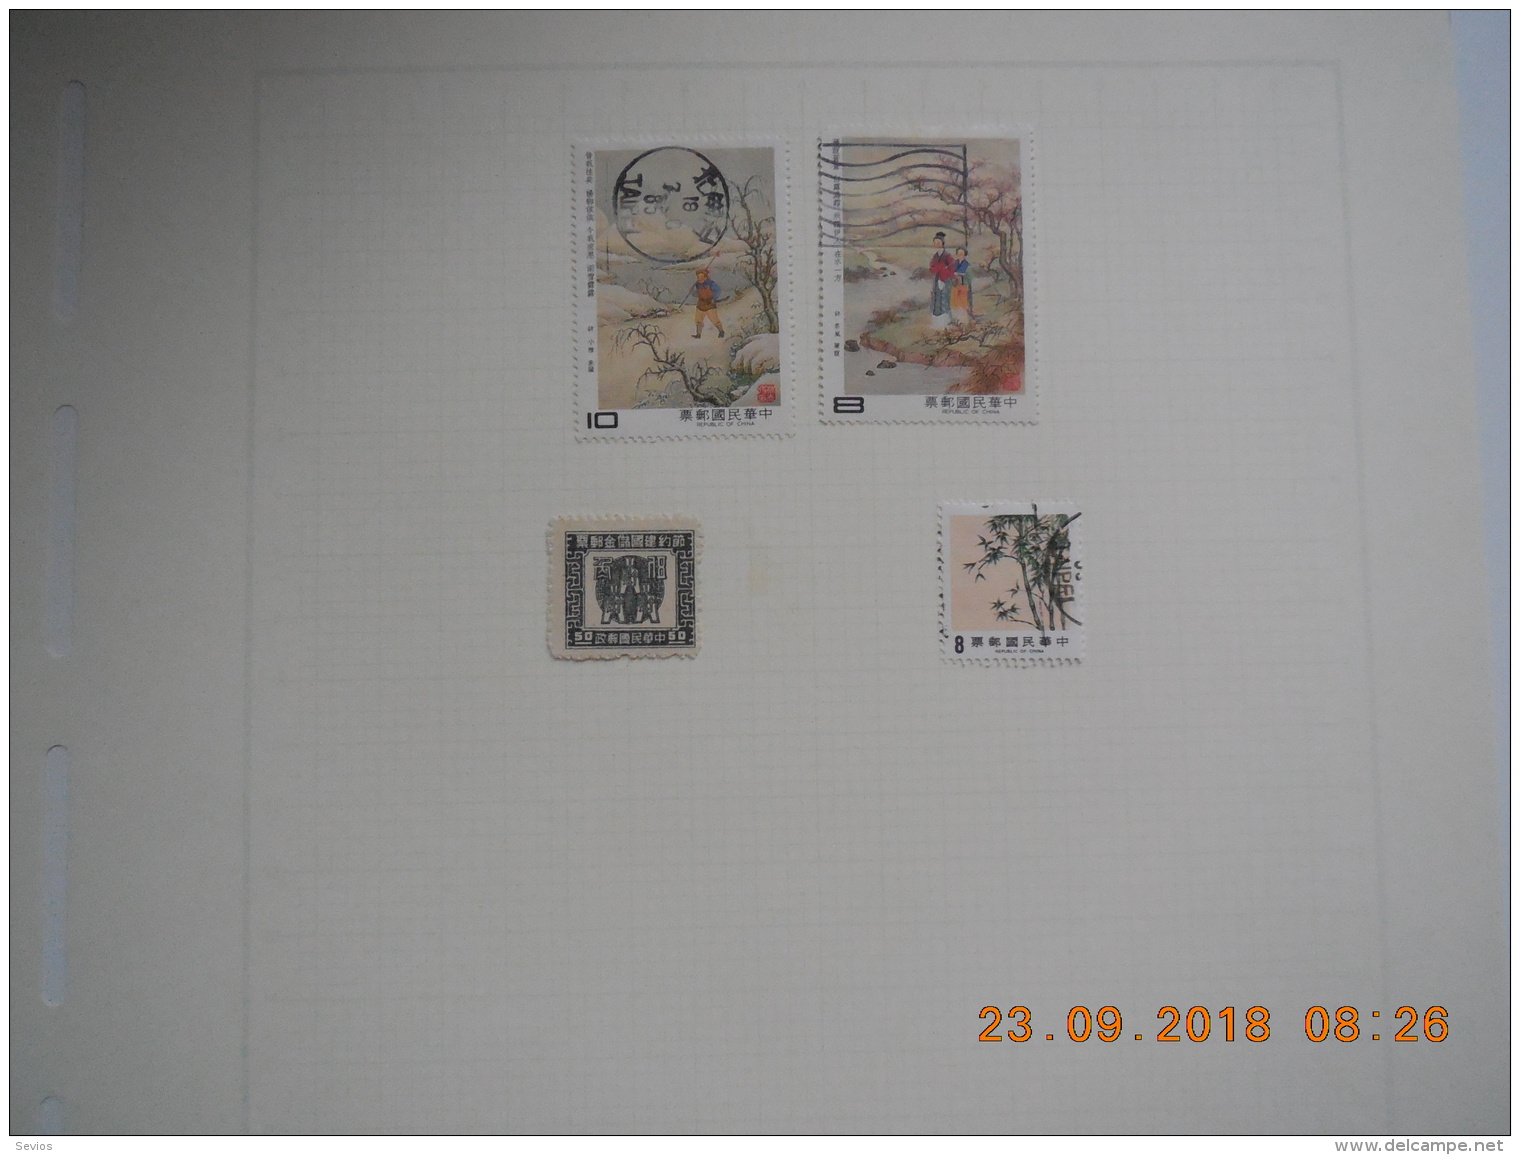 Stamp / China / Stamp **, *, (*) or Used